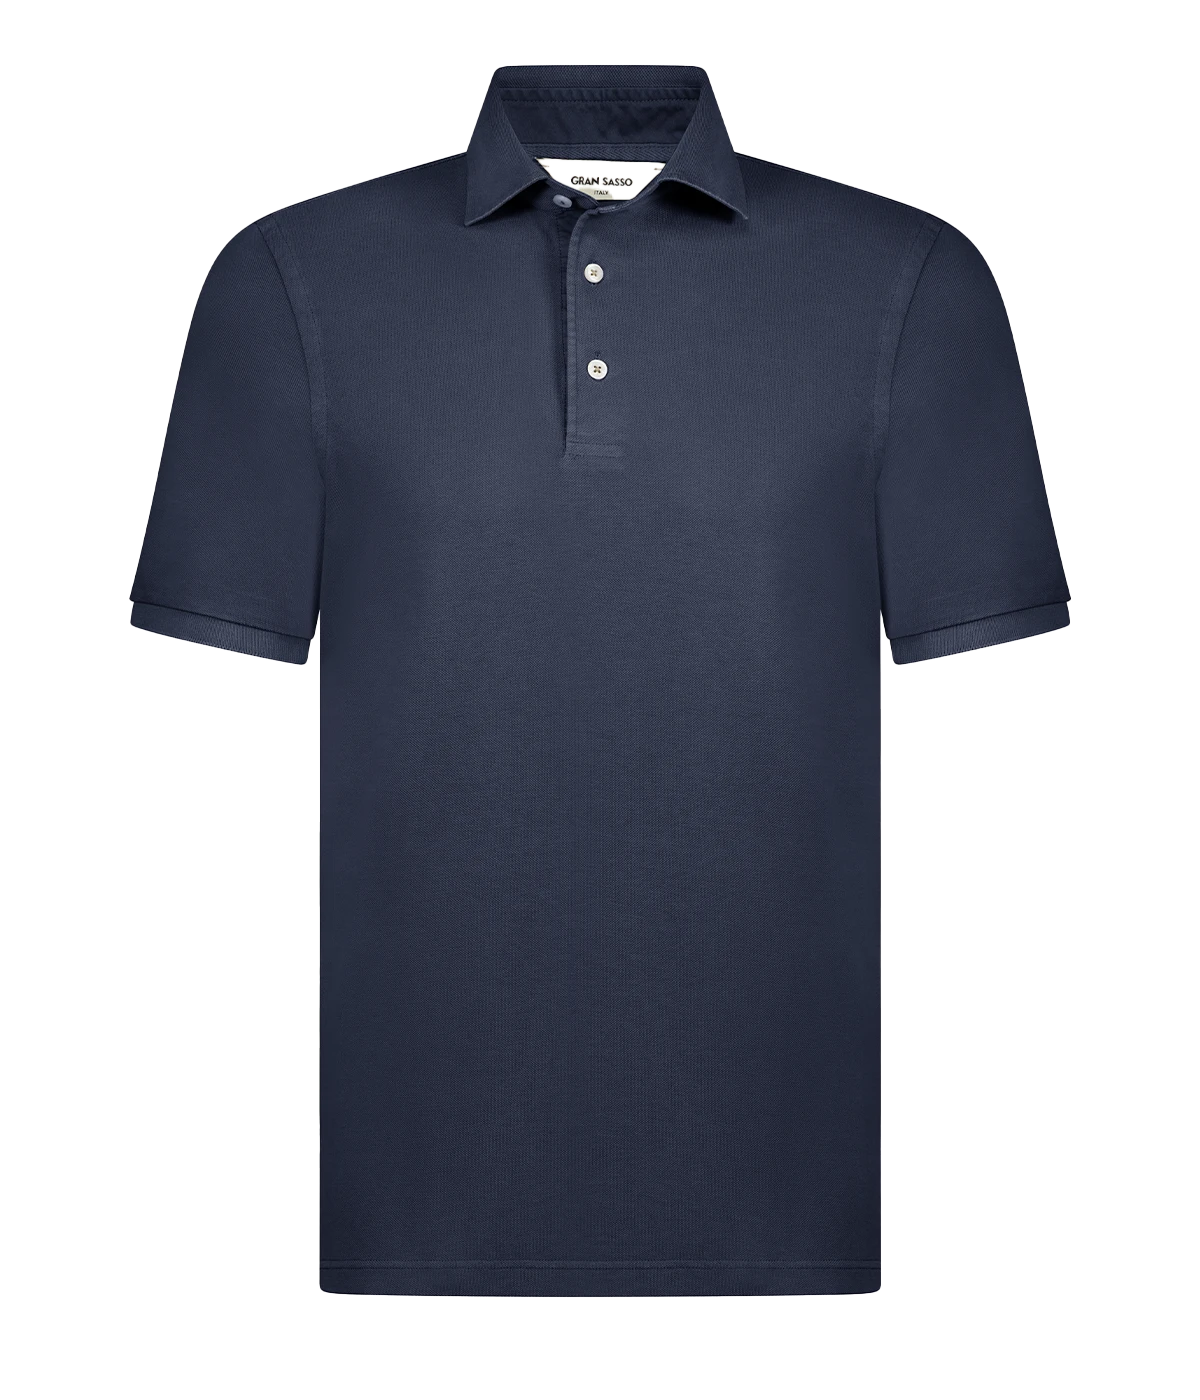   A timeless classic short sleeve polo in a navy blue, featuring a light weight cotton material, three button detail and collar. Sporty Polo, comfortable, made in Italy, throw on and go. 